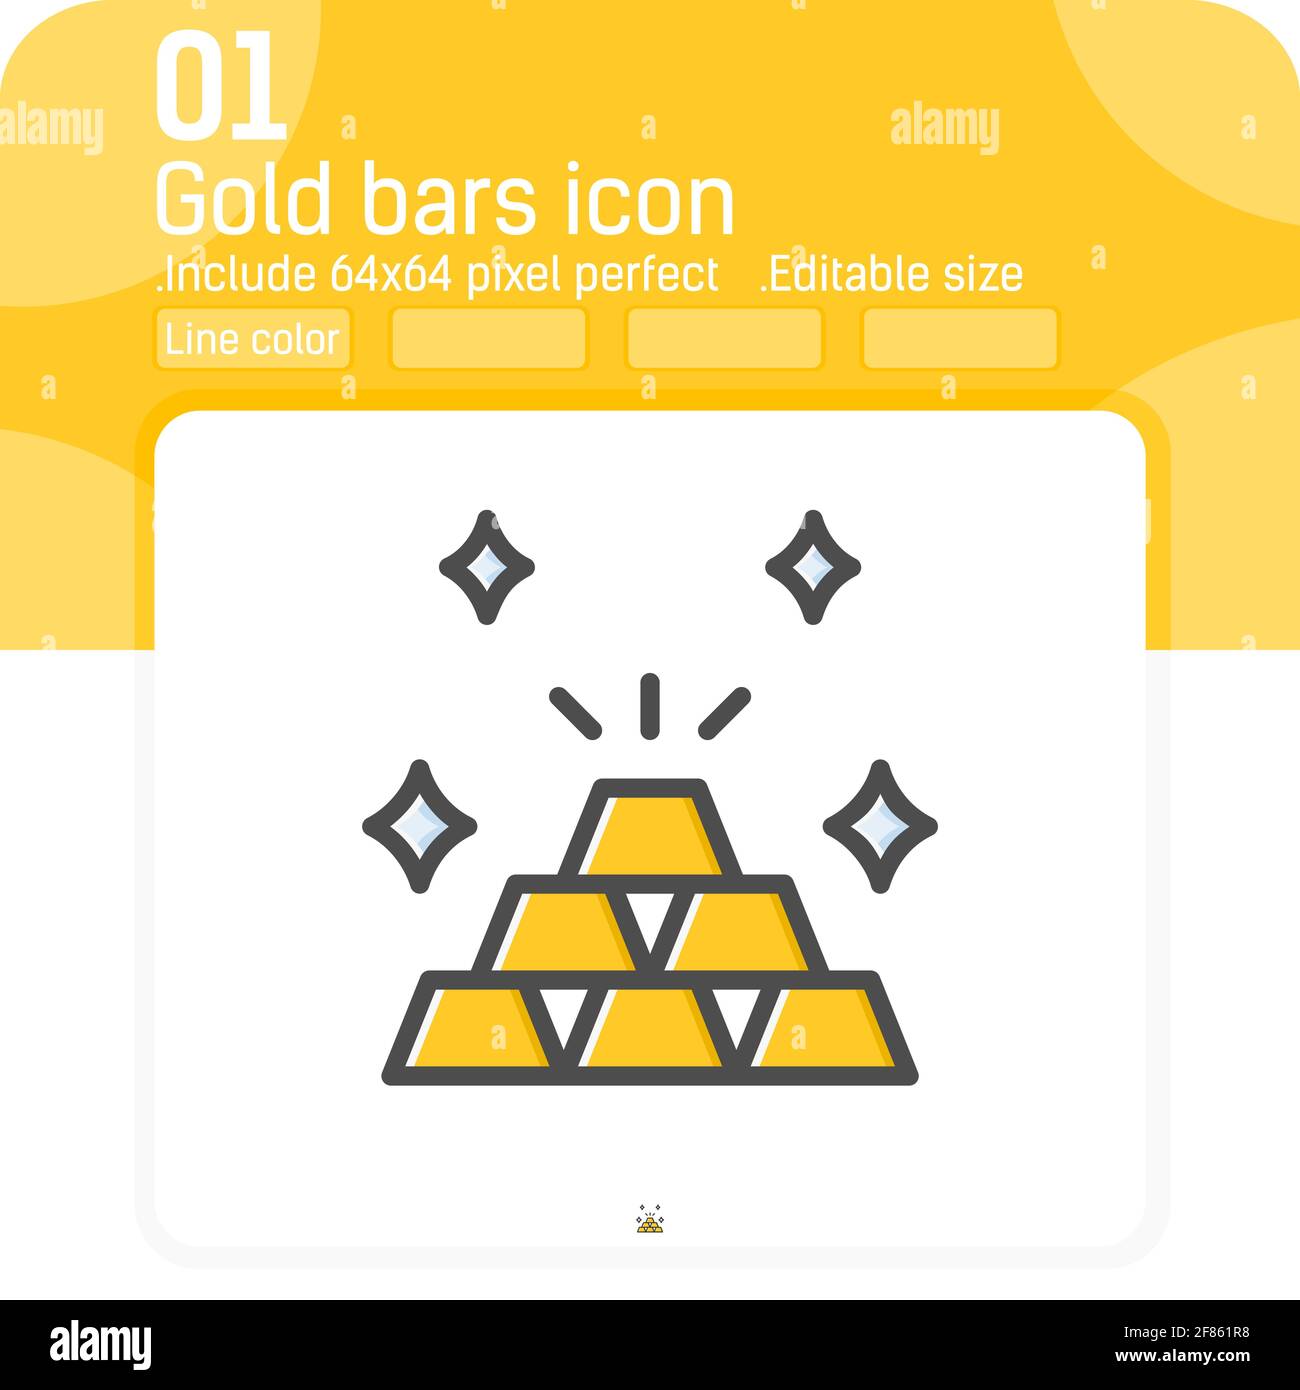 Stack of gold bars or treasure stash icon with line color style isolated on white background. Illustration element thin gold icon Stock Vector